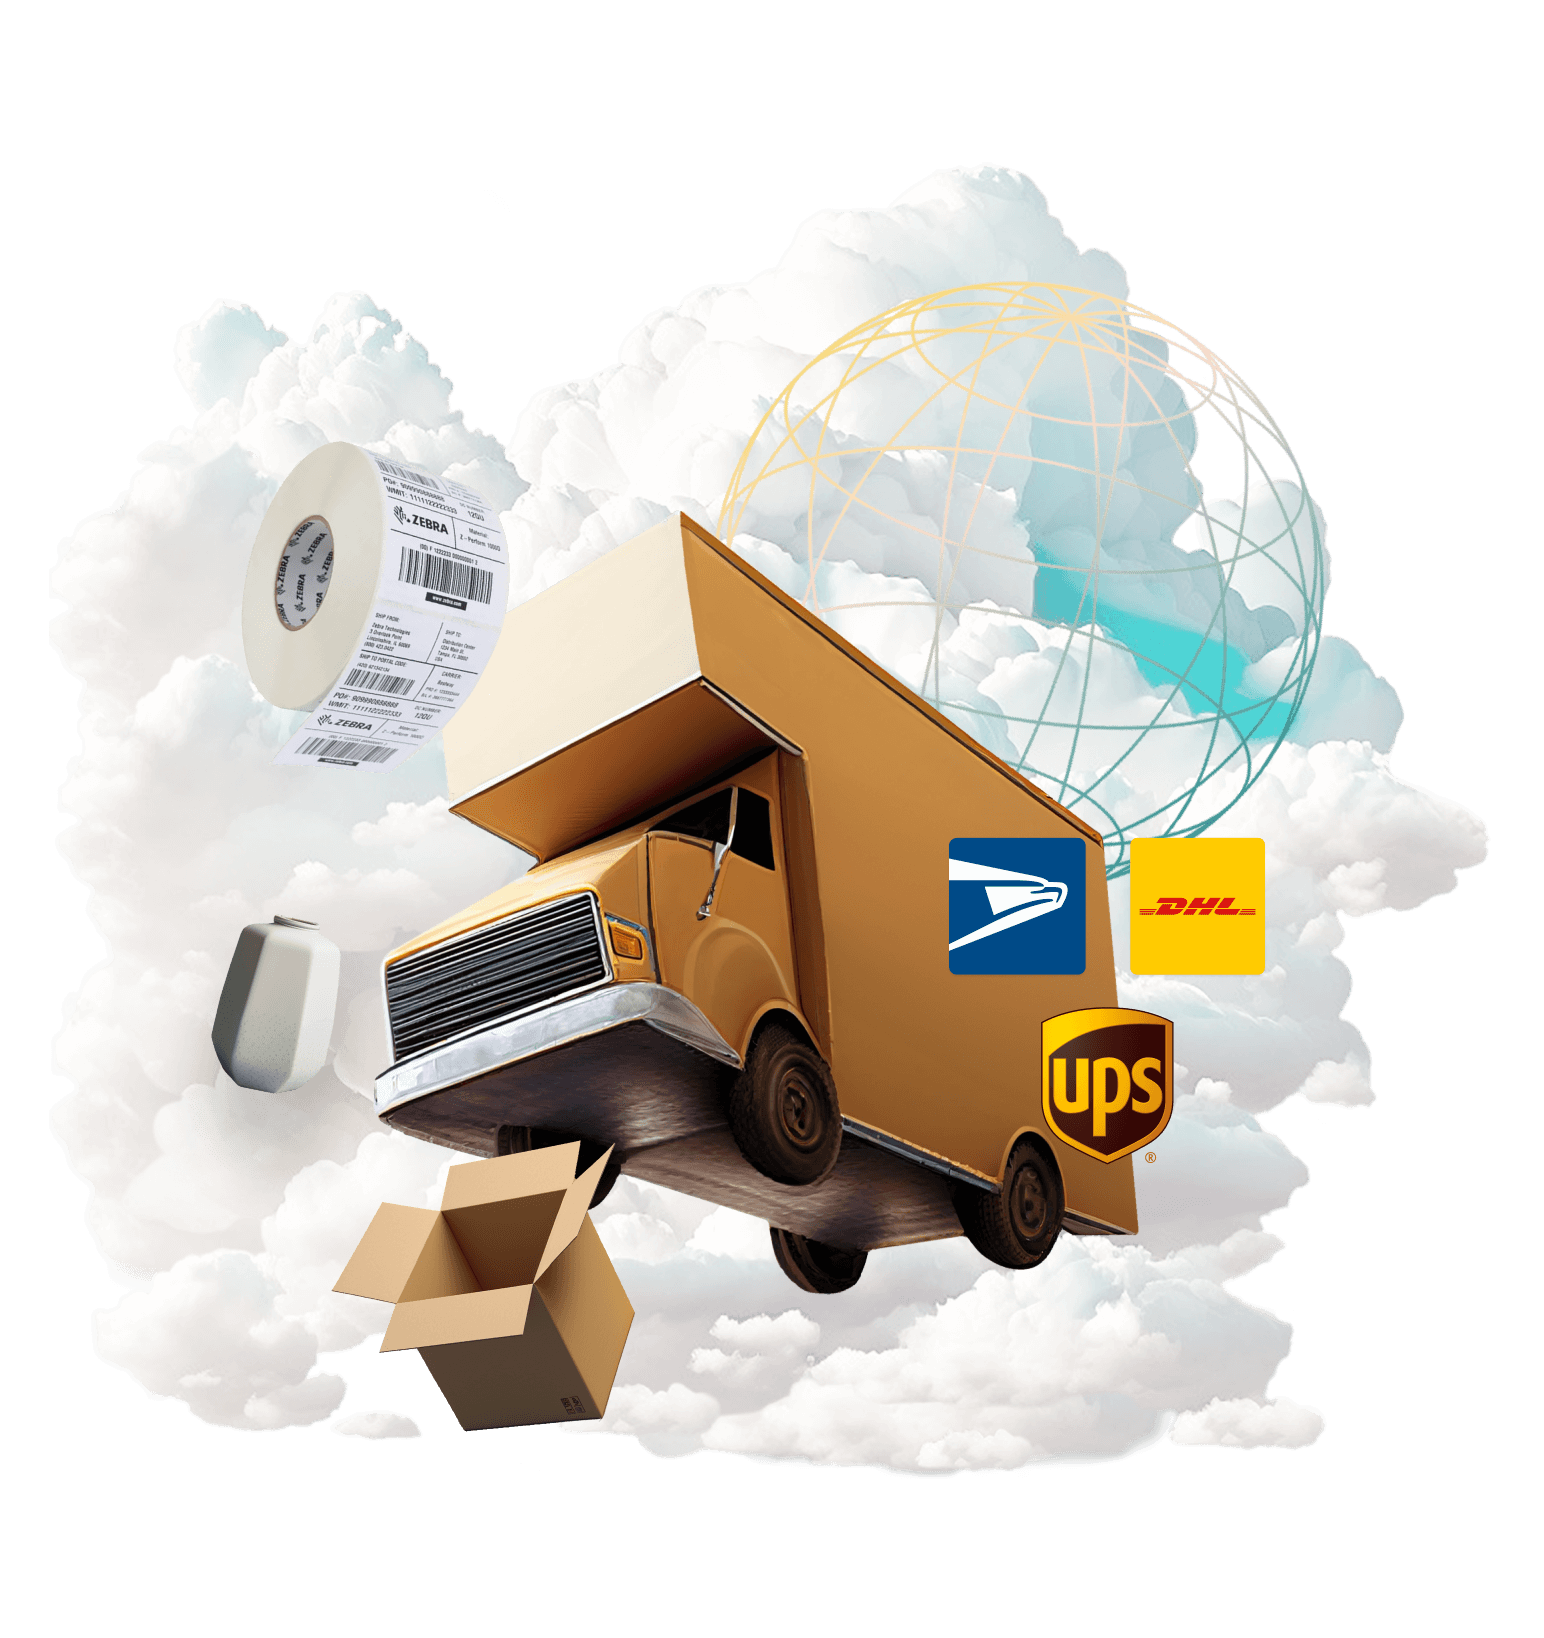 The image features a large truck in a cloud-filled sky, symbolizing the shipping industry. The truck is labeled with various symbols and labels, such as "ups", "usps", and "dhl", representing different shipping services supported in your region. In addition to the truck, there are several clouds in the sky with different objects around them, including a roll of shipping labels, an open box and a vase, representing a product.